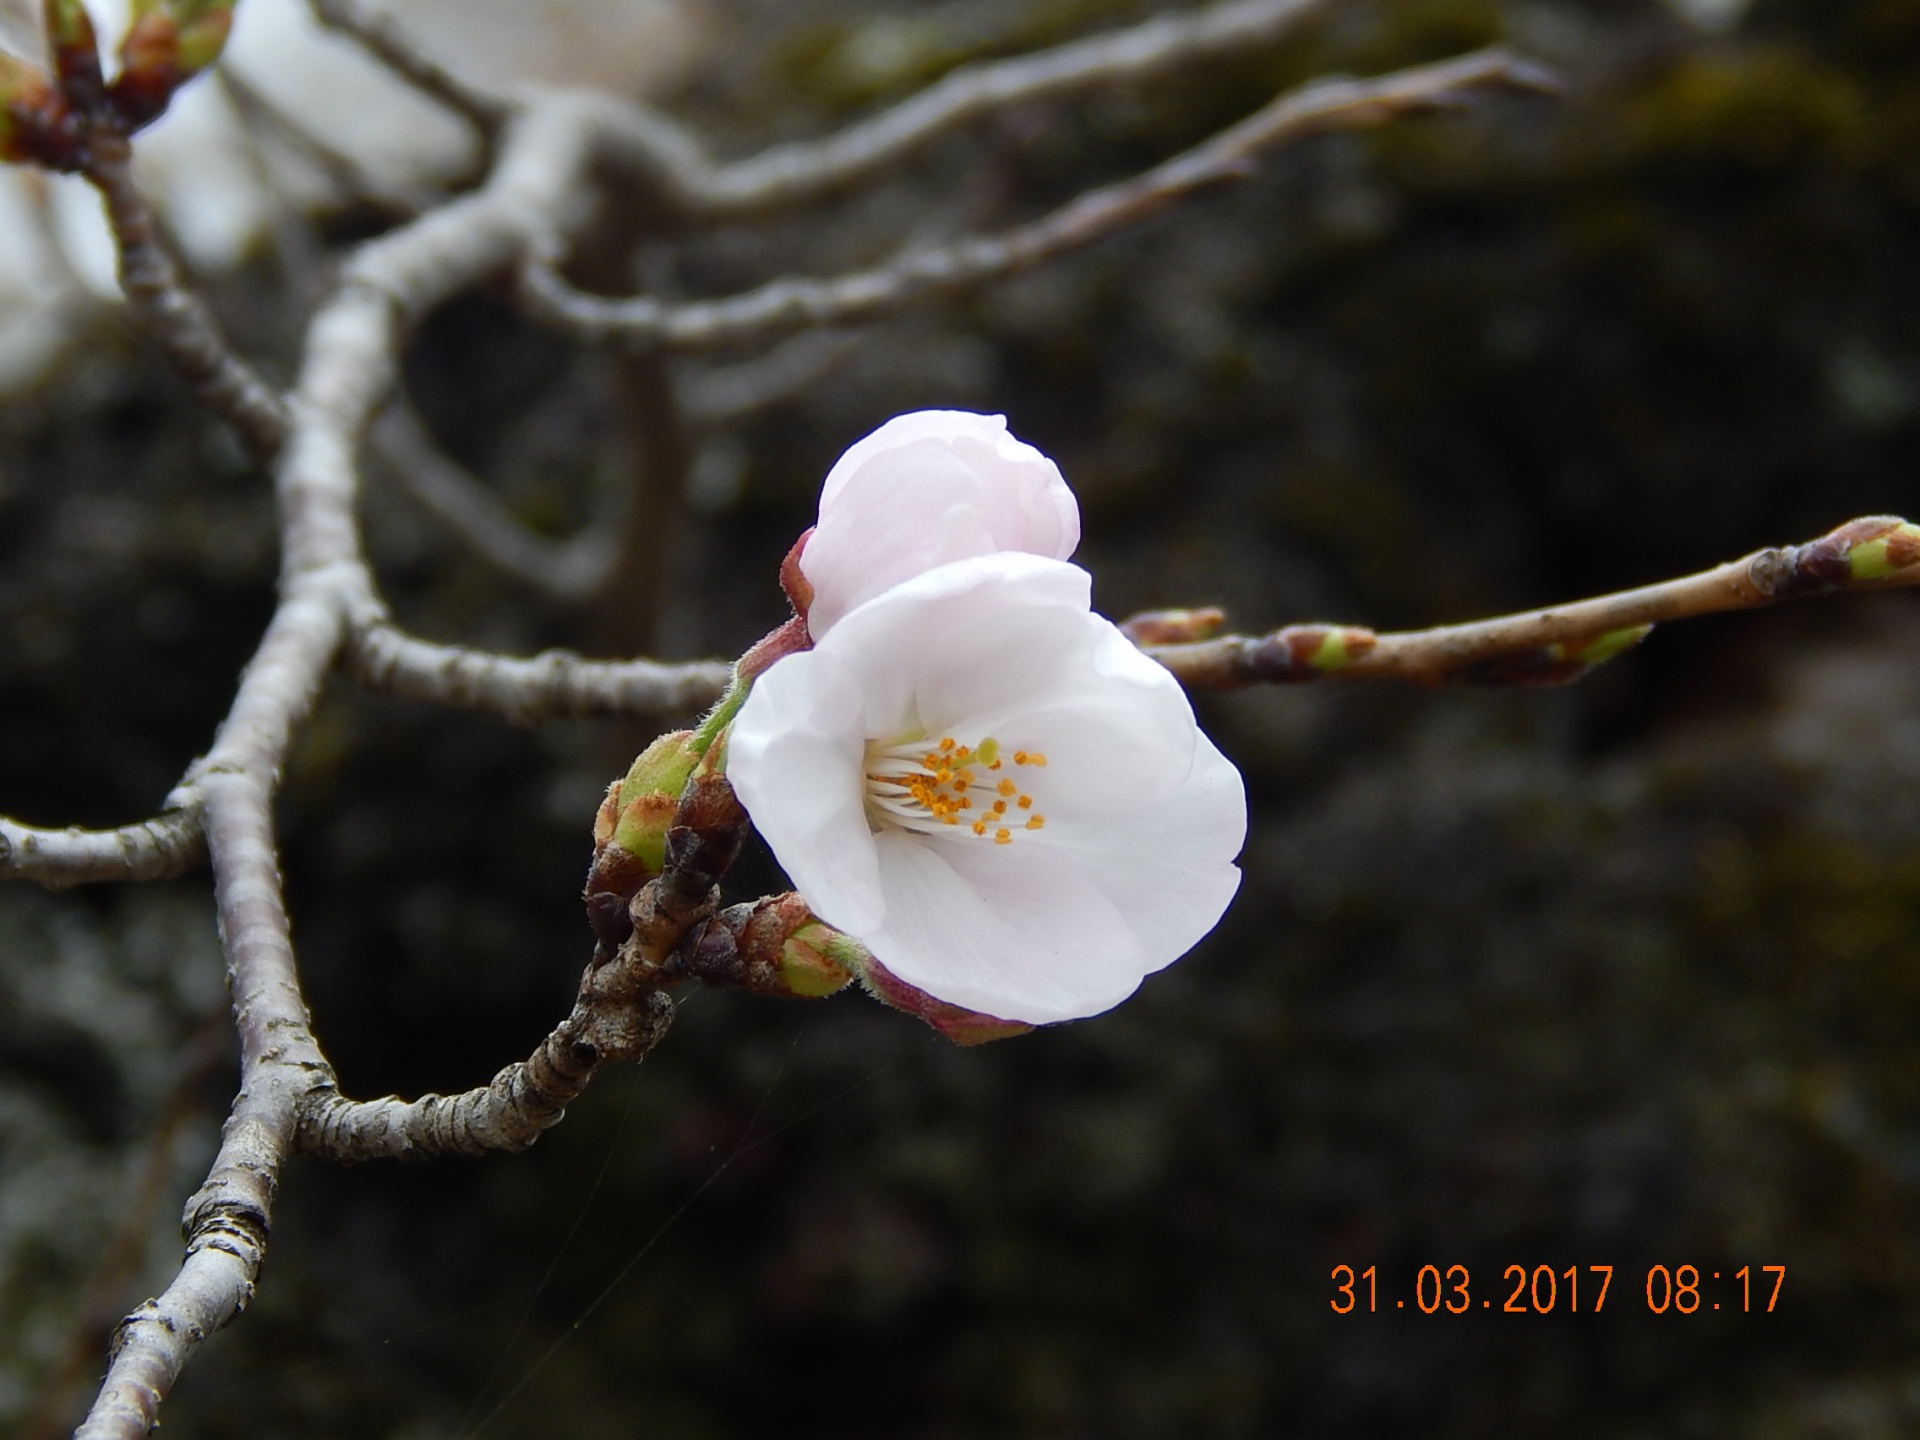 flower early spring blossom free photo